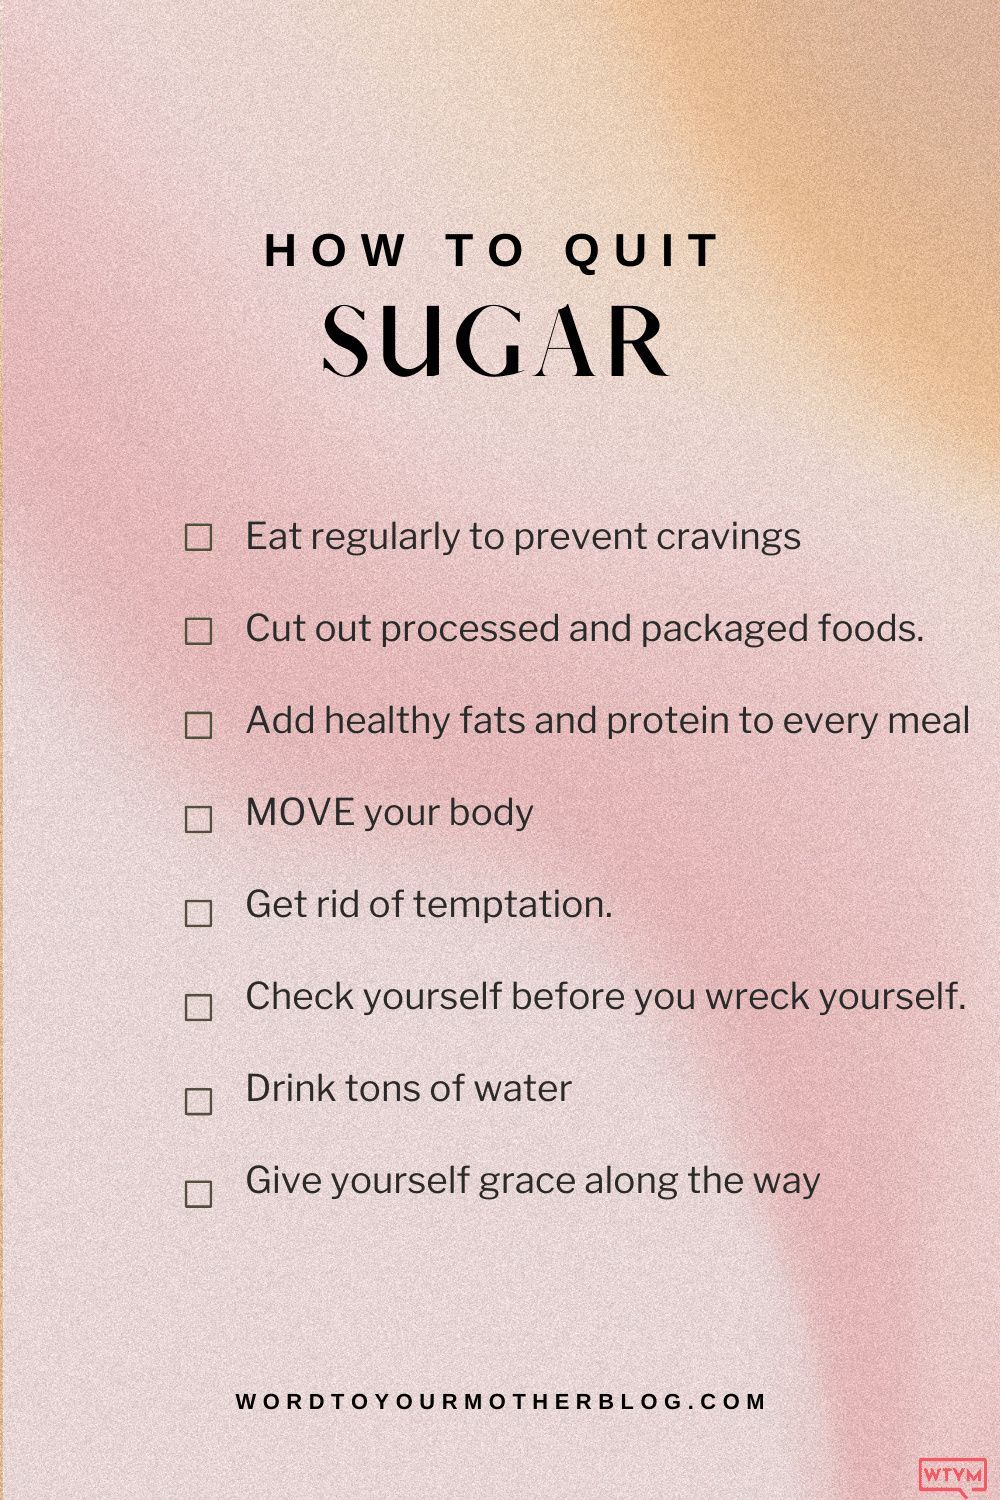 How To Quit Sugar Without Losing Your Mind